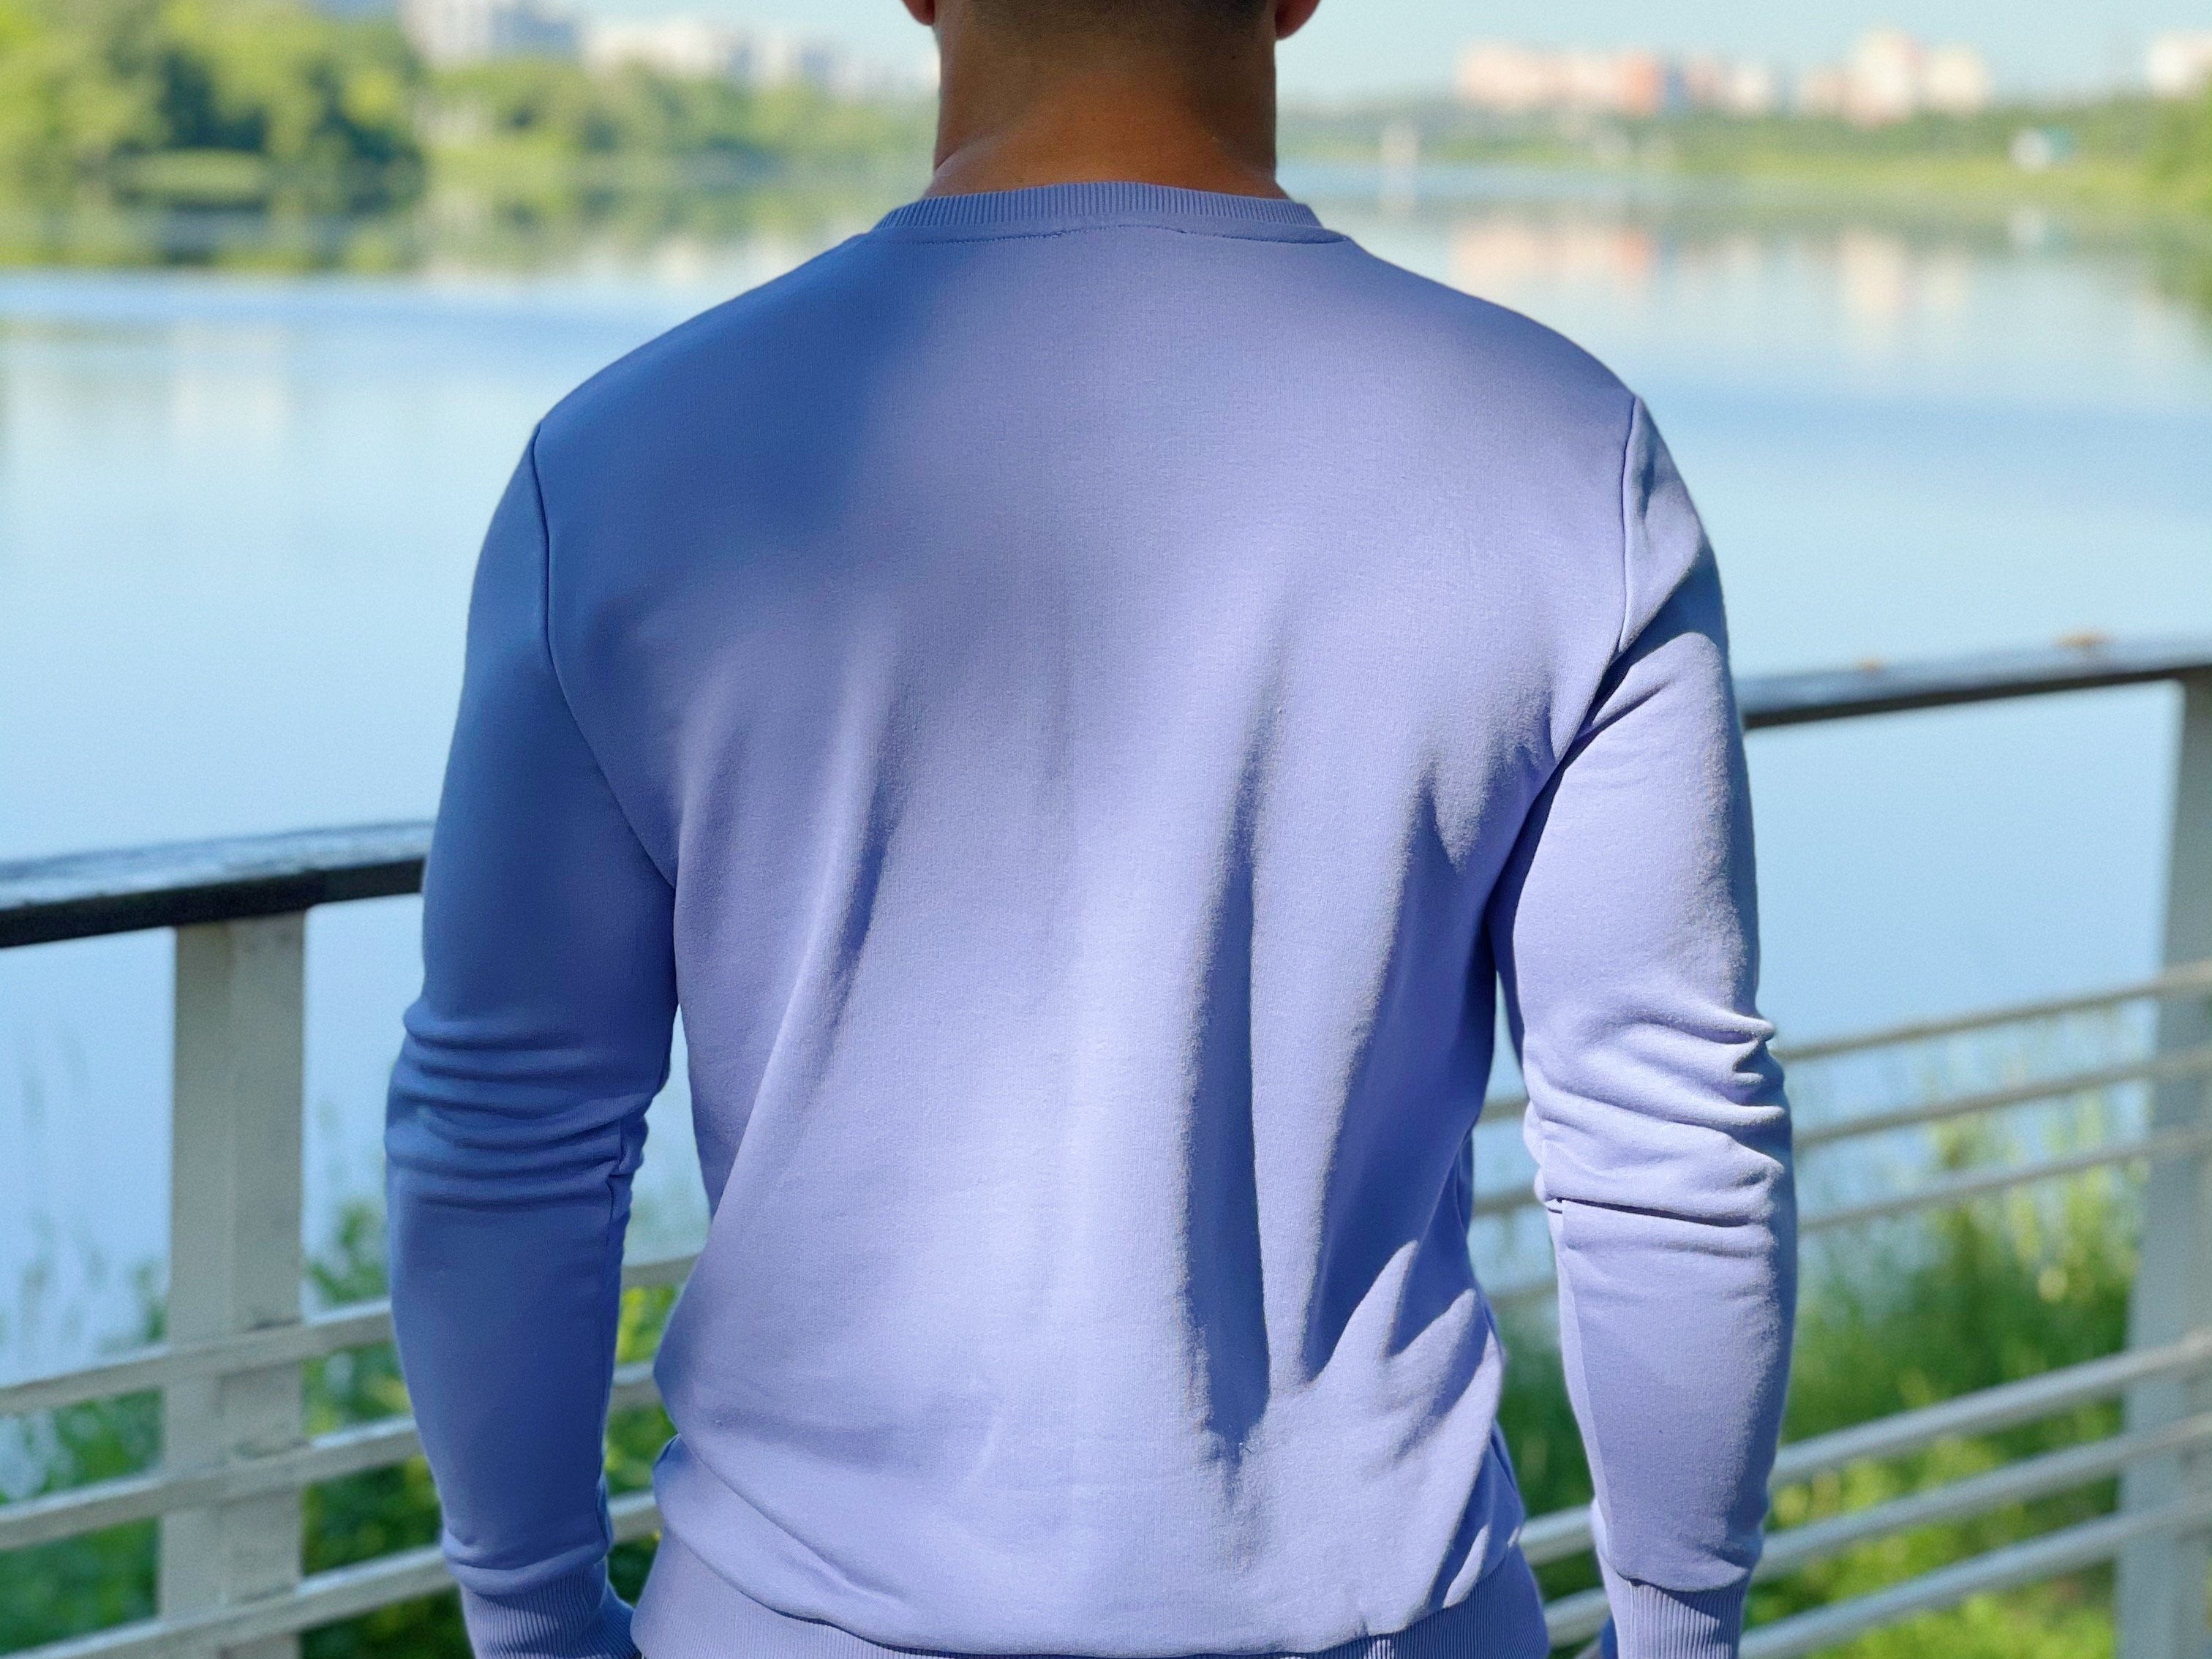 Stanley - Shades of Blue Long Sleeves Shirt for Men (PRE-ORDER DISPATCH DATE 25 NOVEMBER 2021) - Sarman Fashion - Wholesale Clothing Fashion Brand for Men from Canada